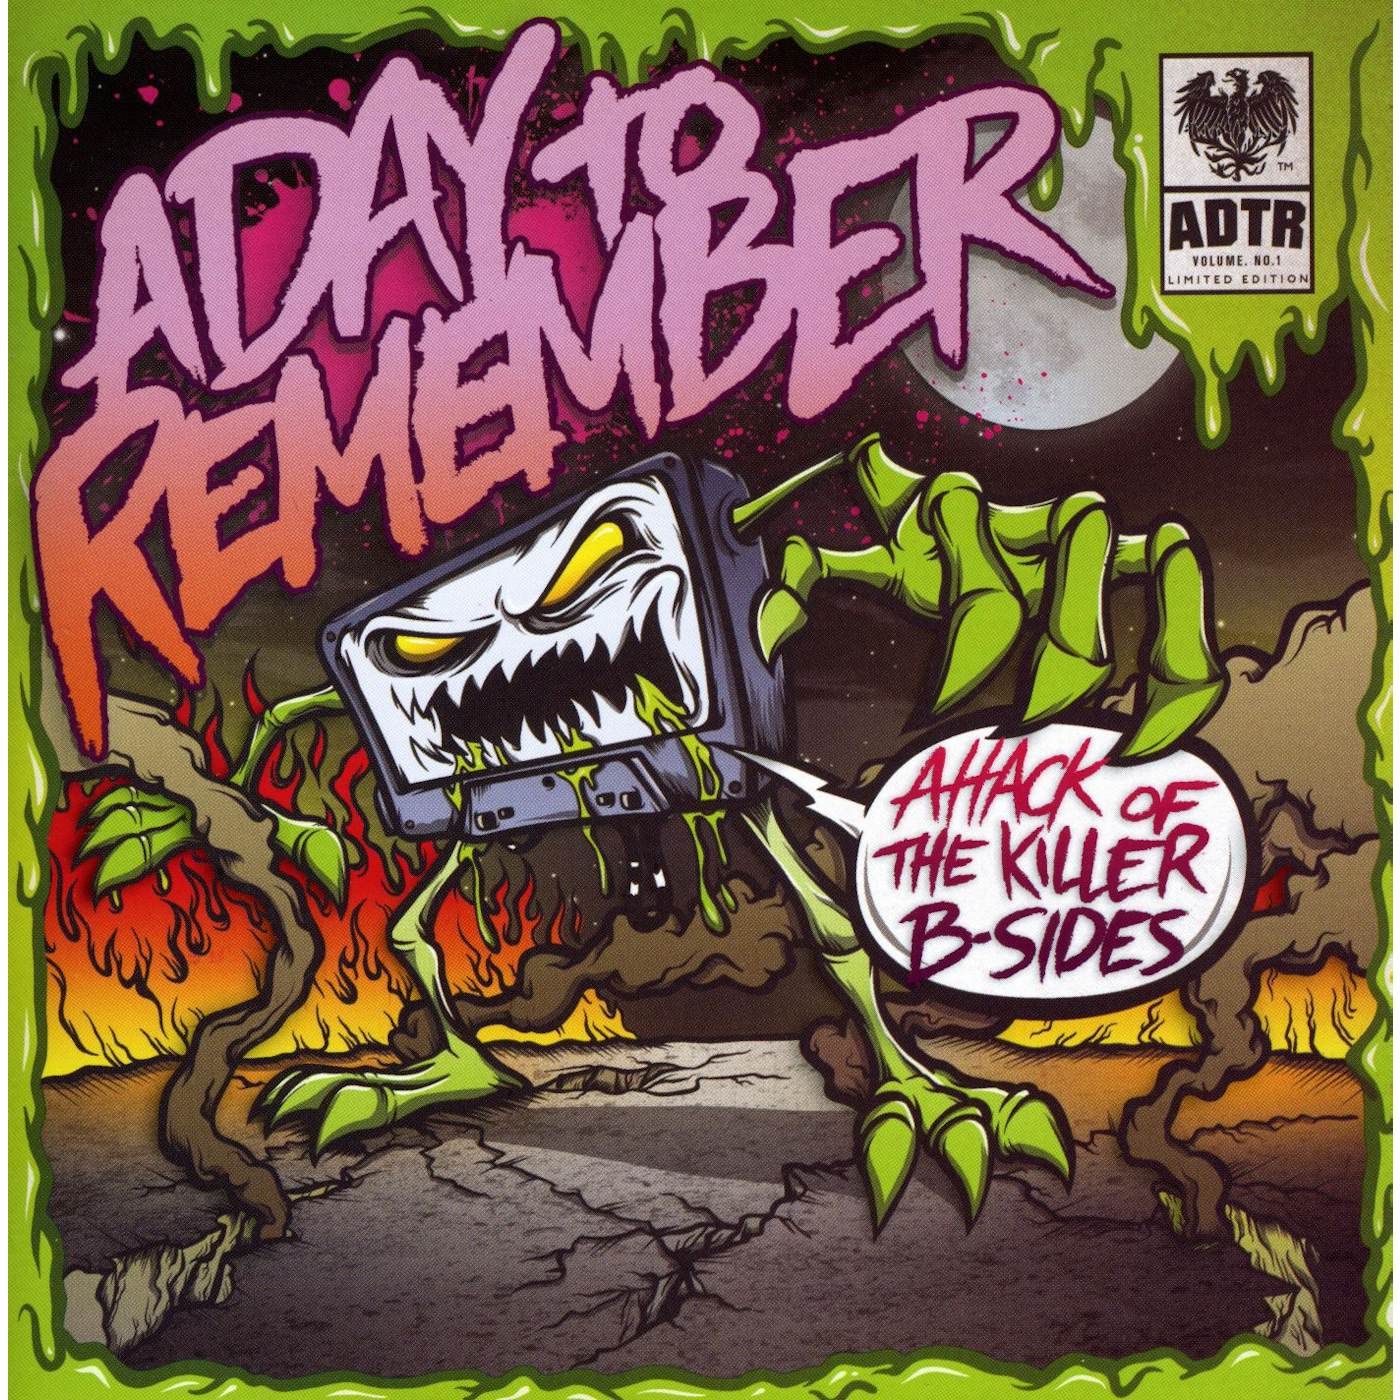 A Day To Remember Attack of the Killer B-Sides Vinyl Record